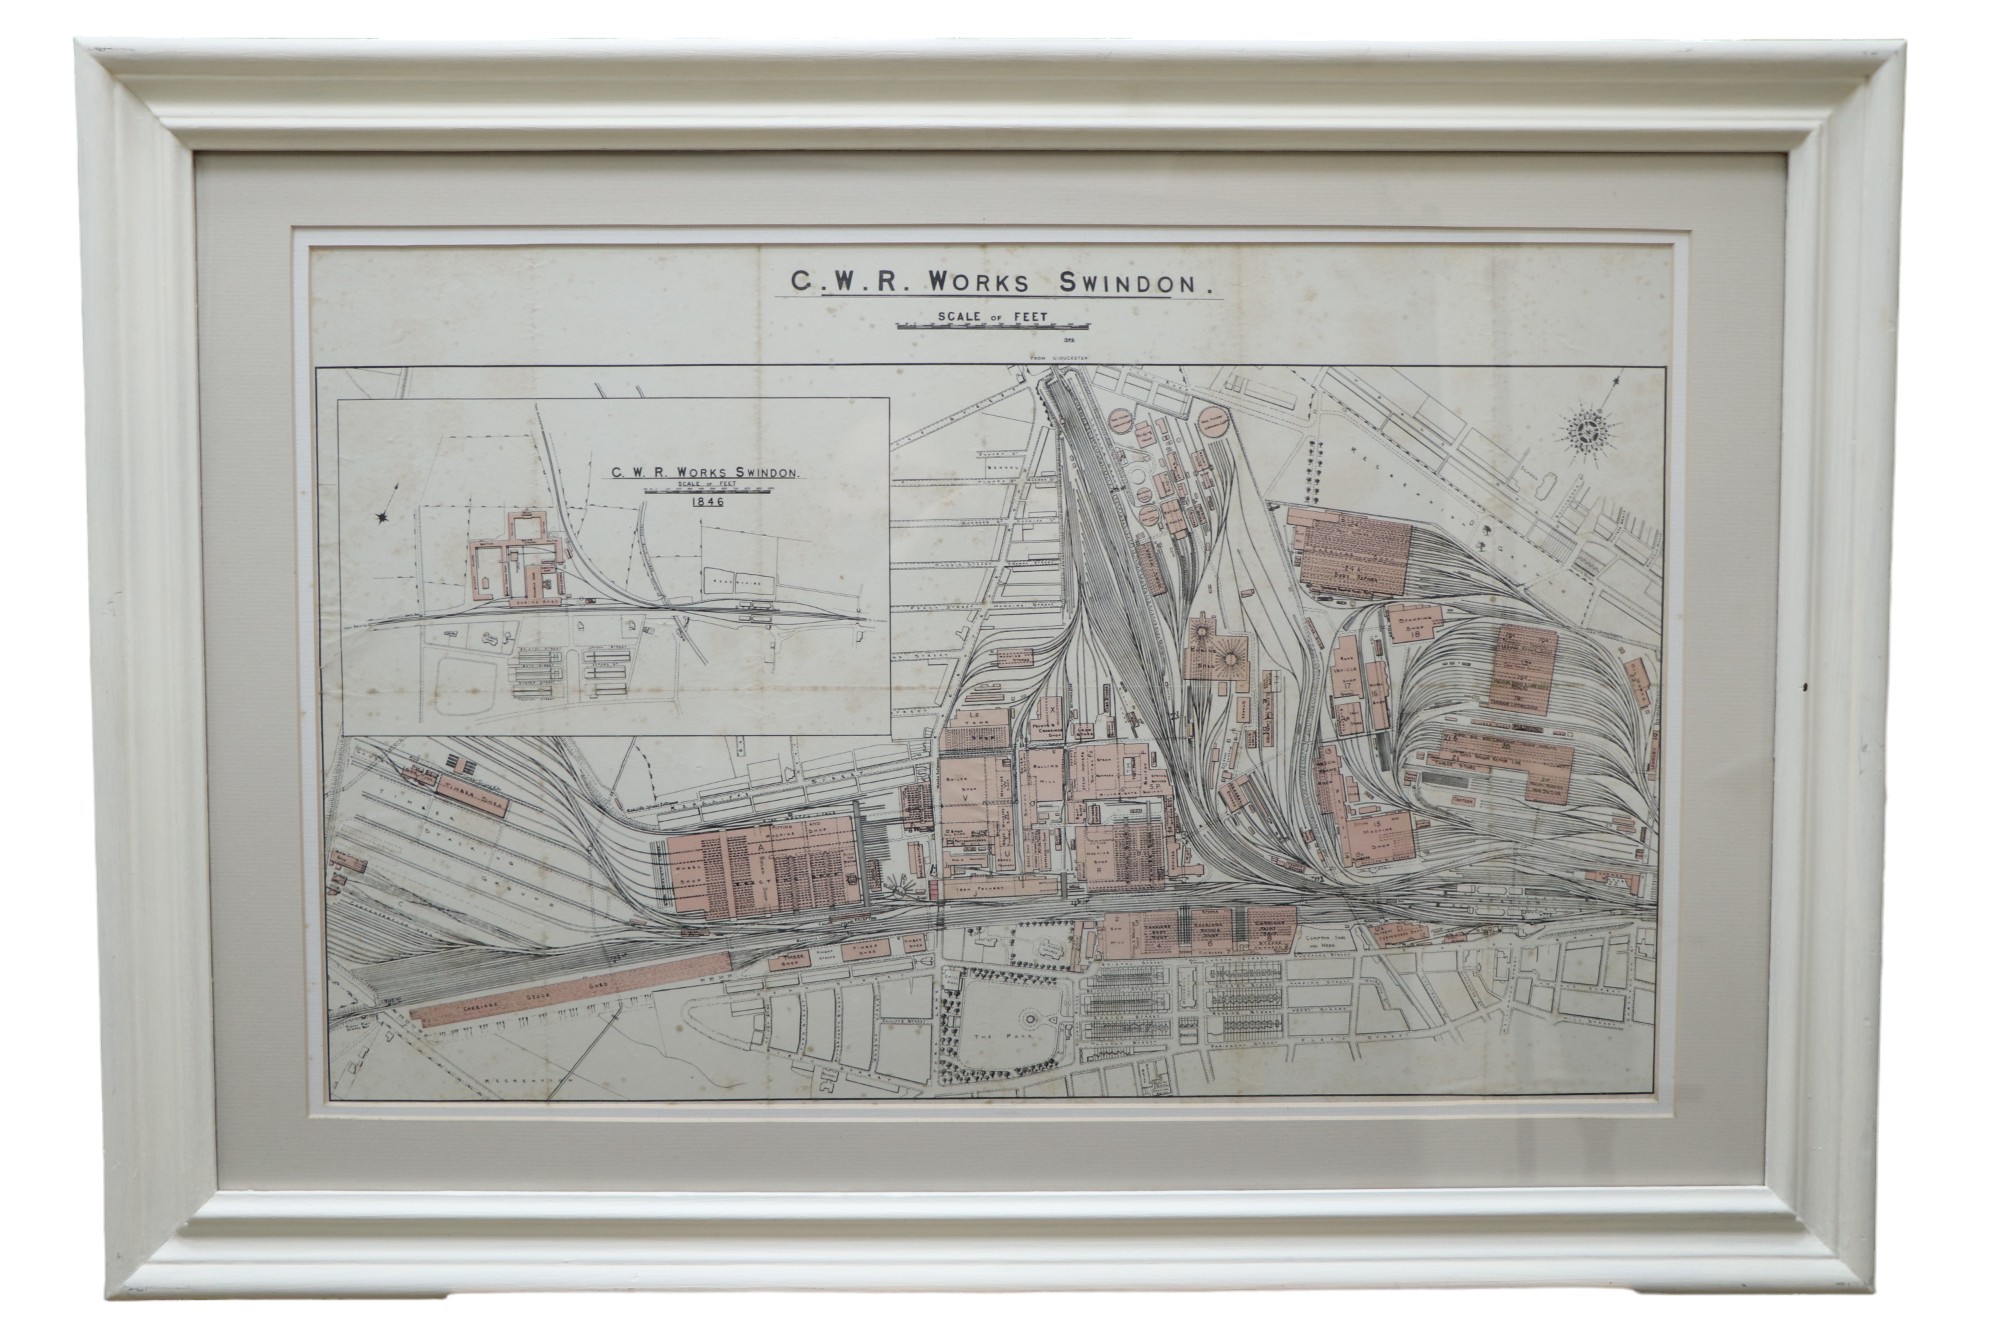 "G W R Works Swindon", a map of the Great Western Railway Works in Swindon, watercolour tinted